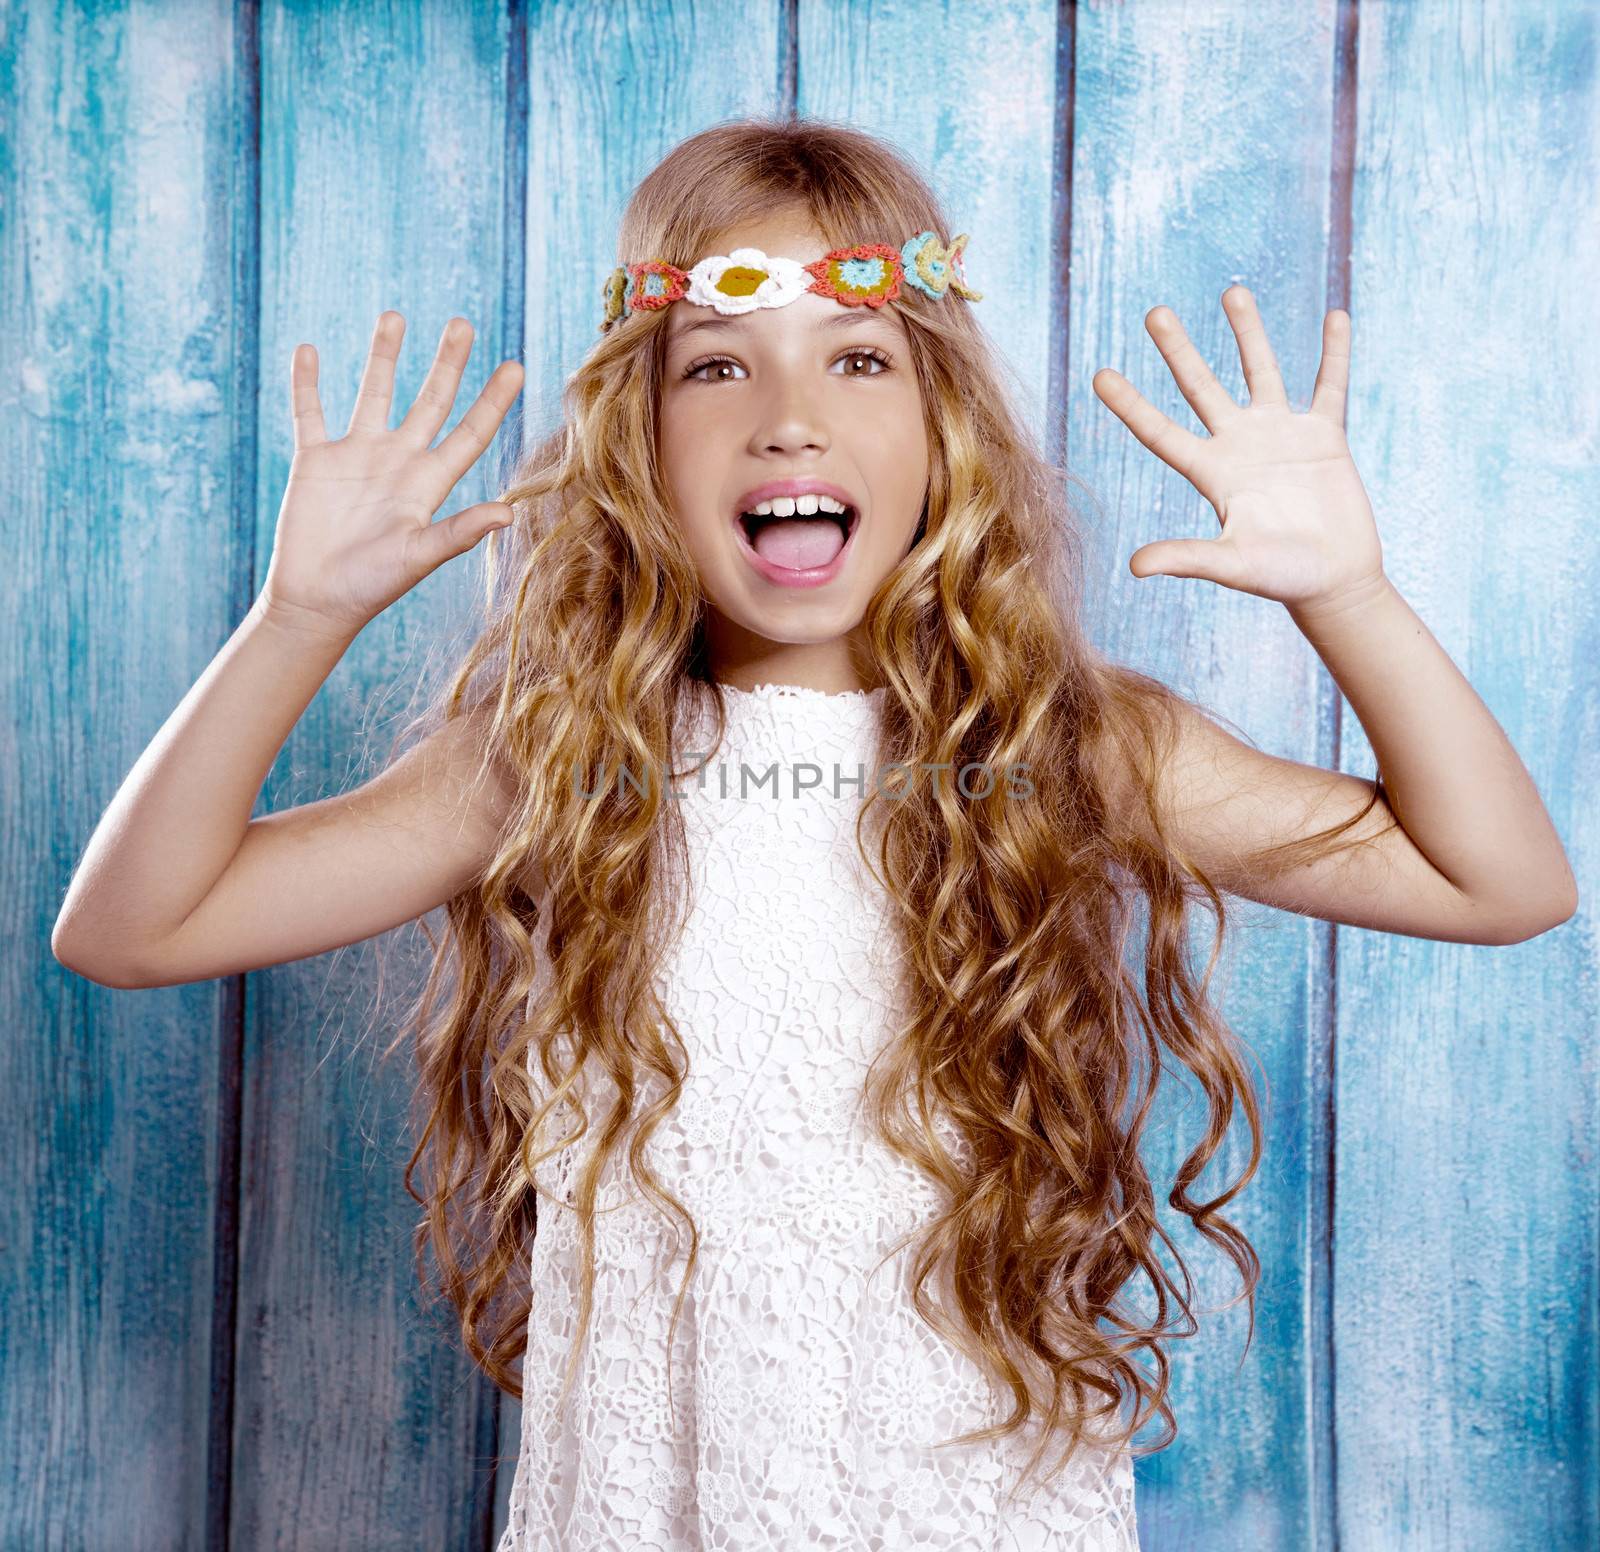 Hippie children girl excited open mouth with open hands and raised arms